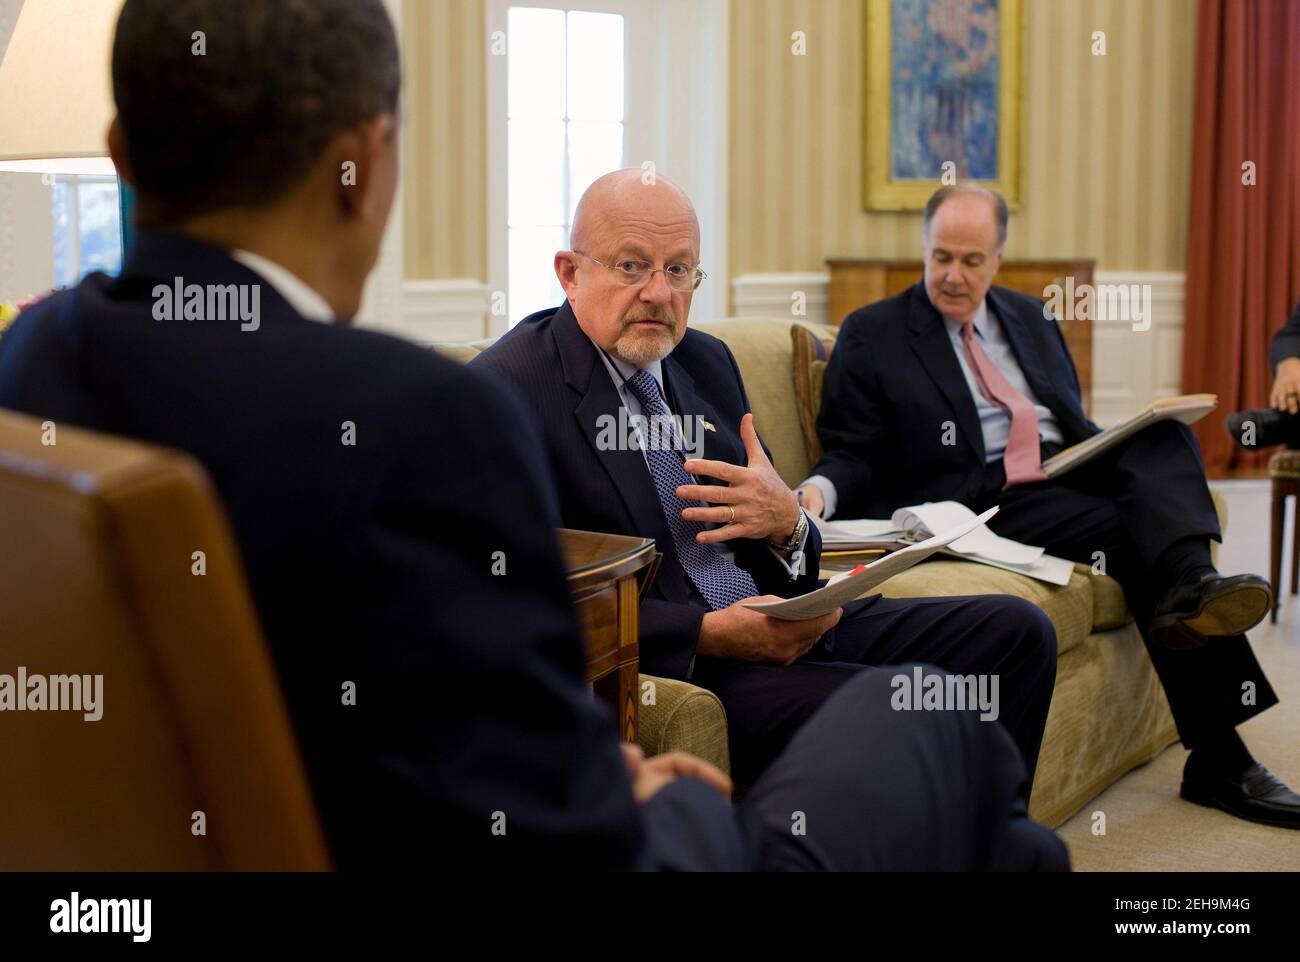 President Barack Obama is briefed on North Korea by Director of National Intelligence James Clapper and National Security Advisor Tom Donilon during the Presidential Daily Briefing in the Oval Office, Nov. 23, 2010. Stock Photo